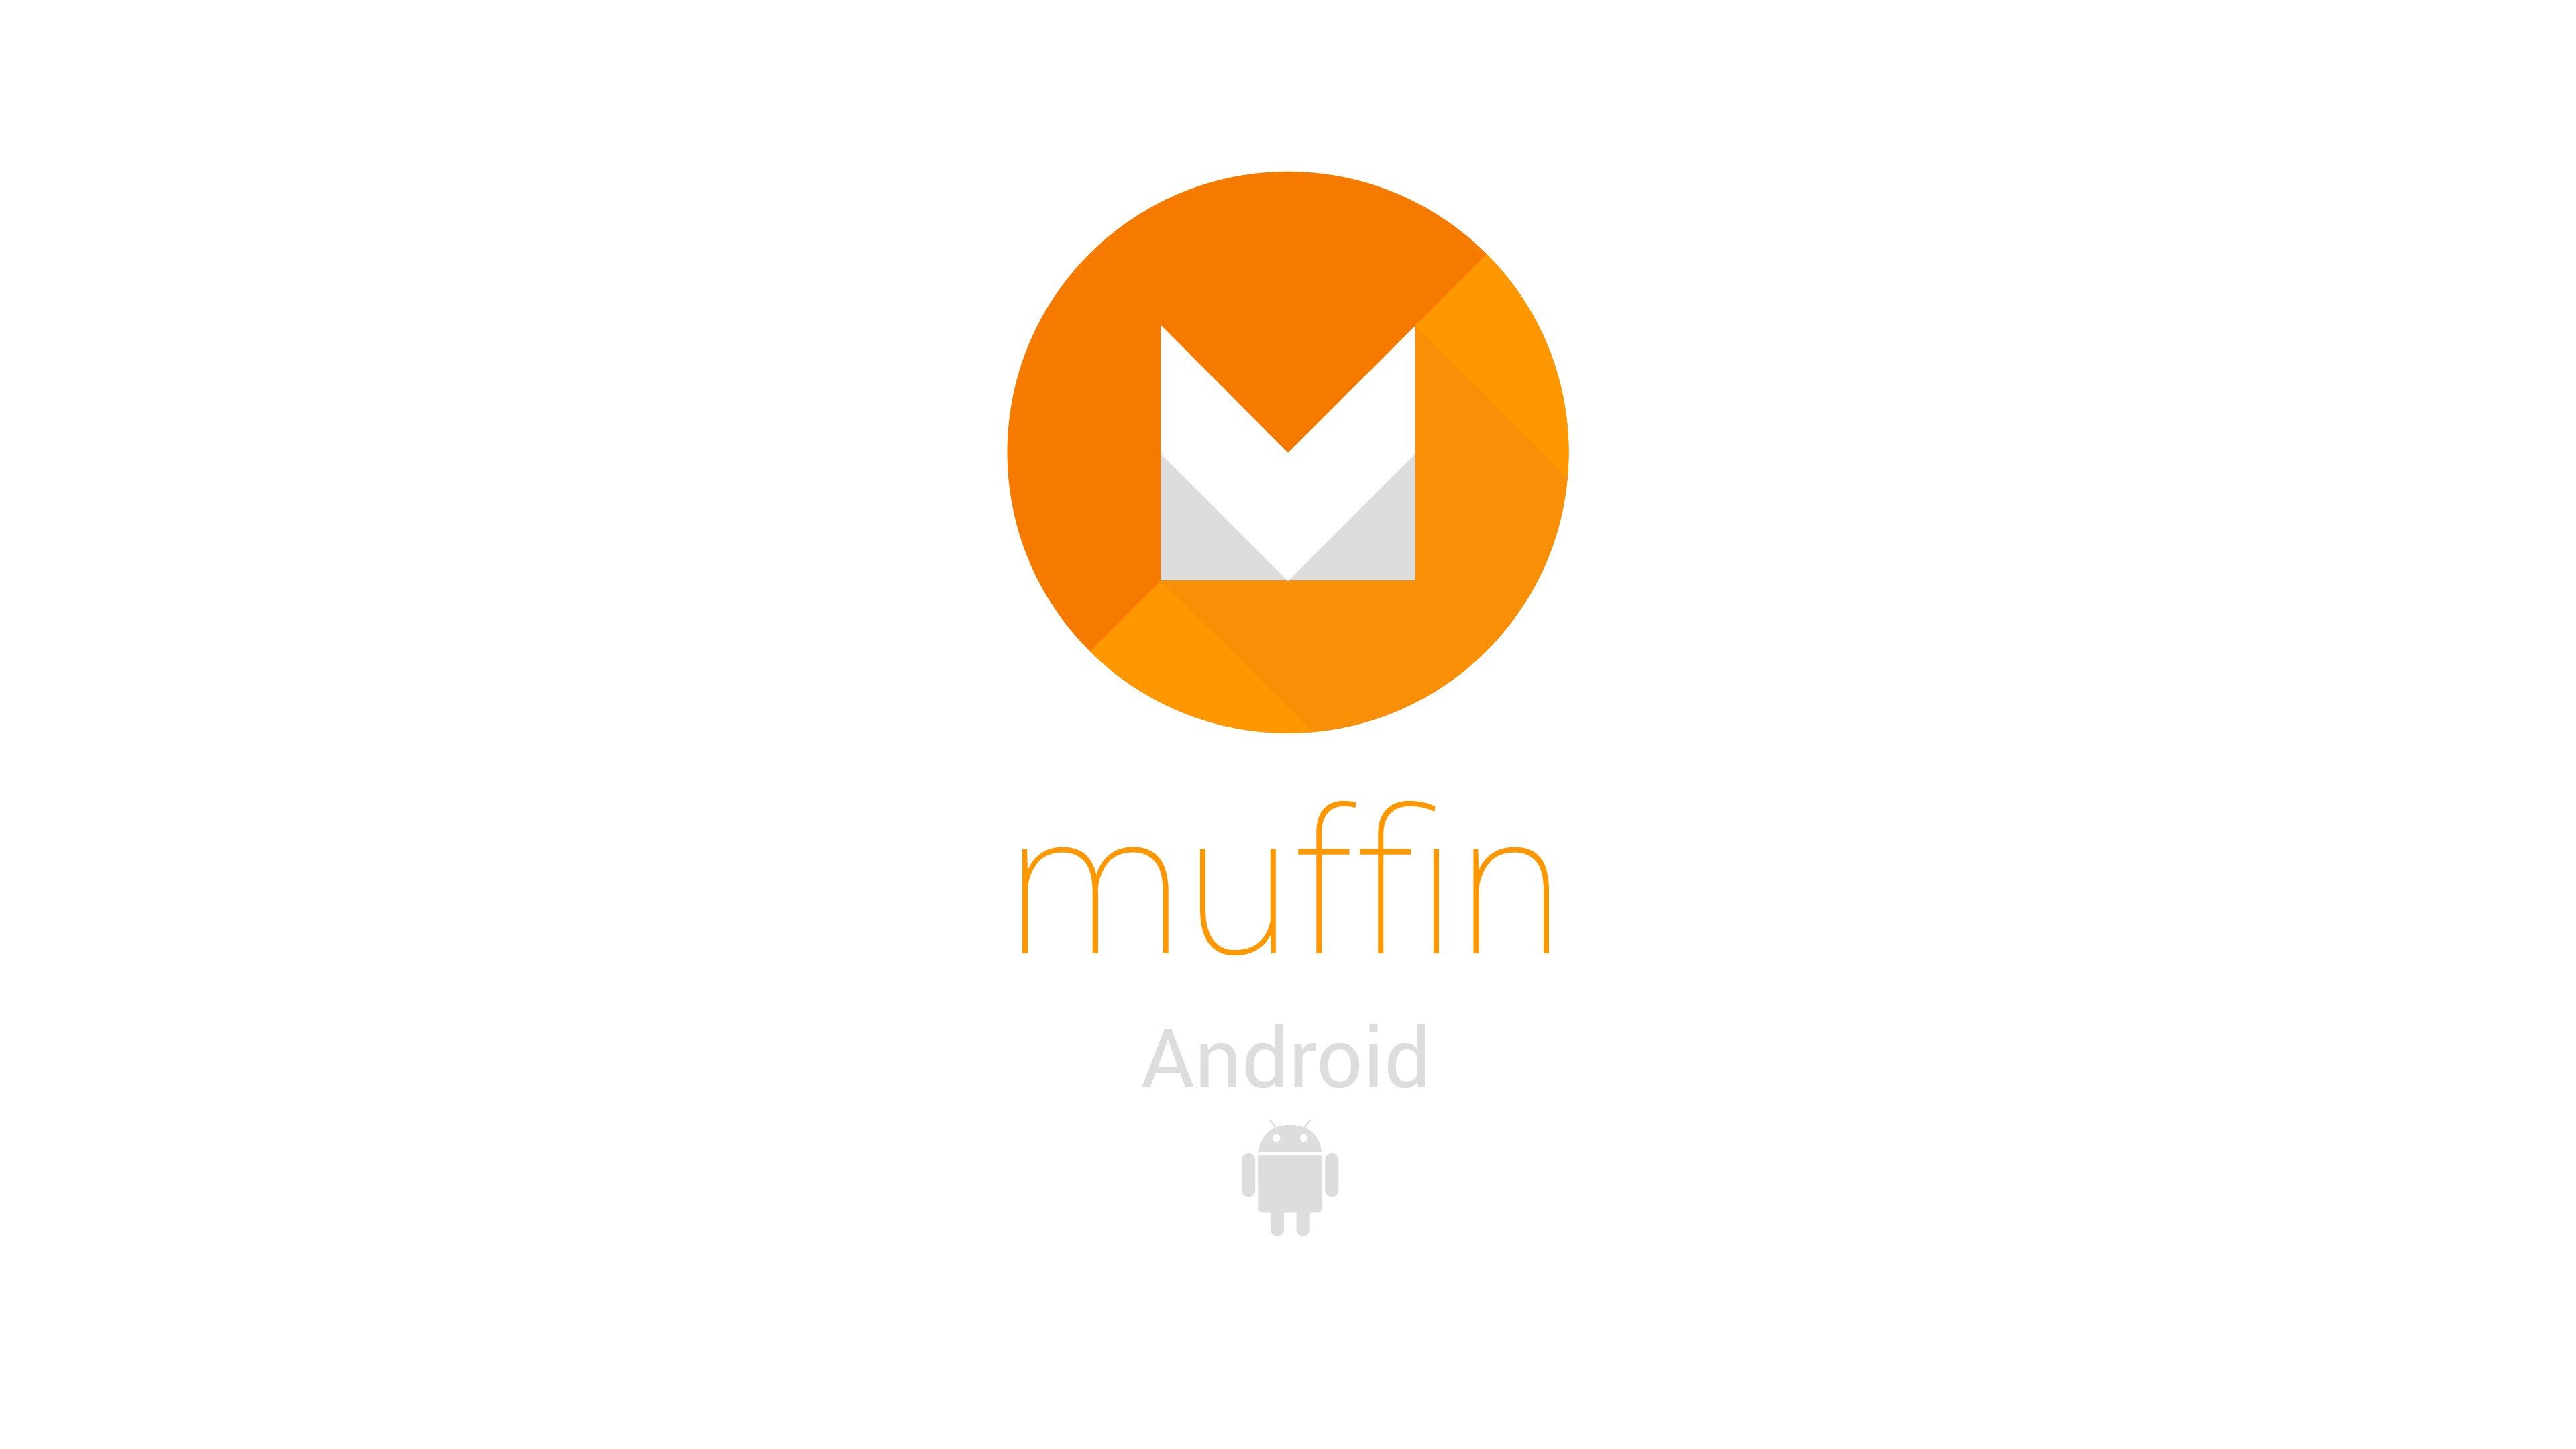 androids, Android (operating system), Operating systems, Muffins Wallpaper